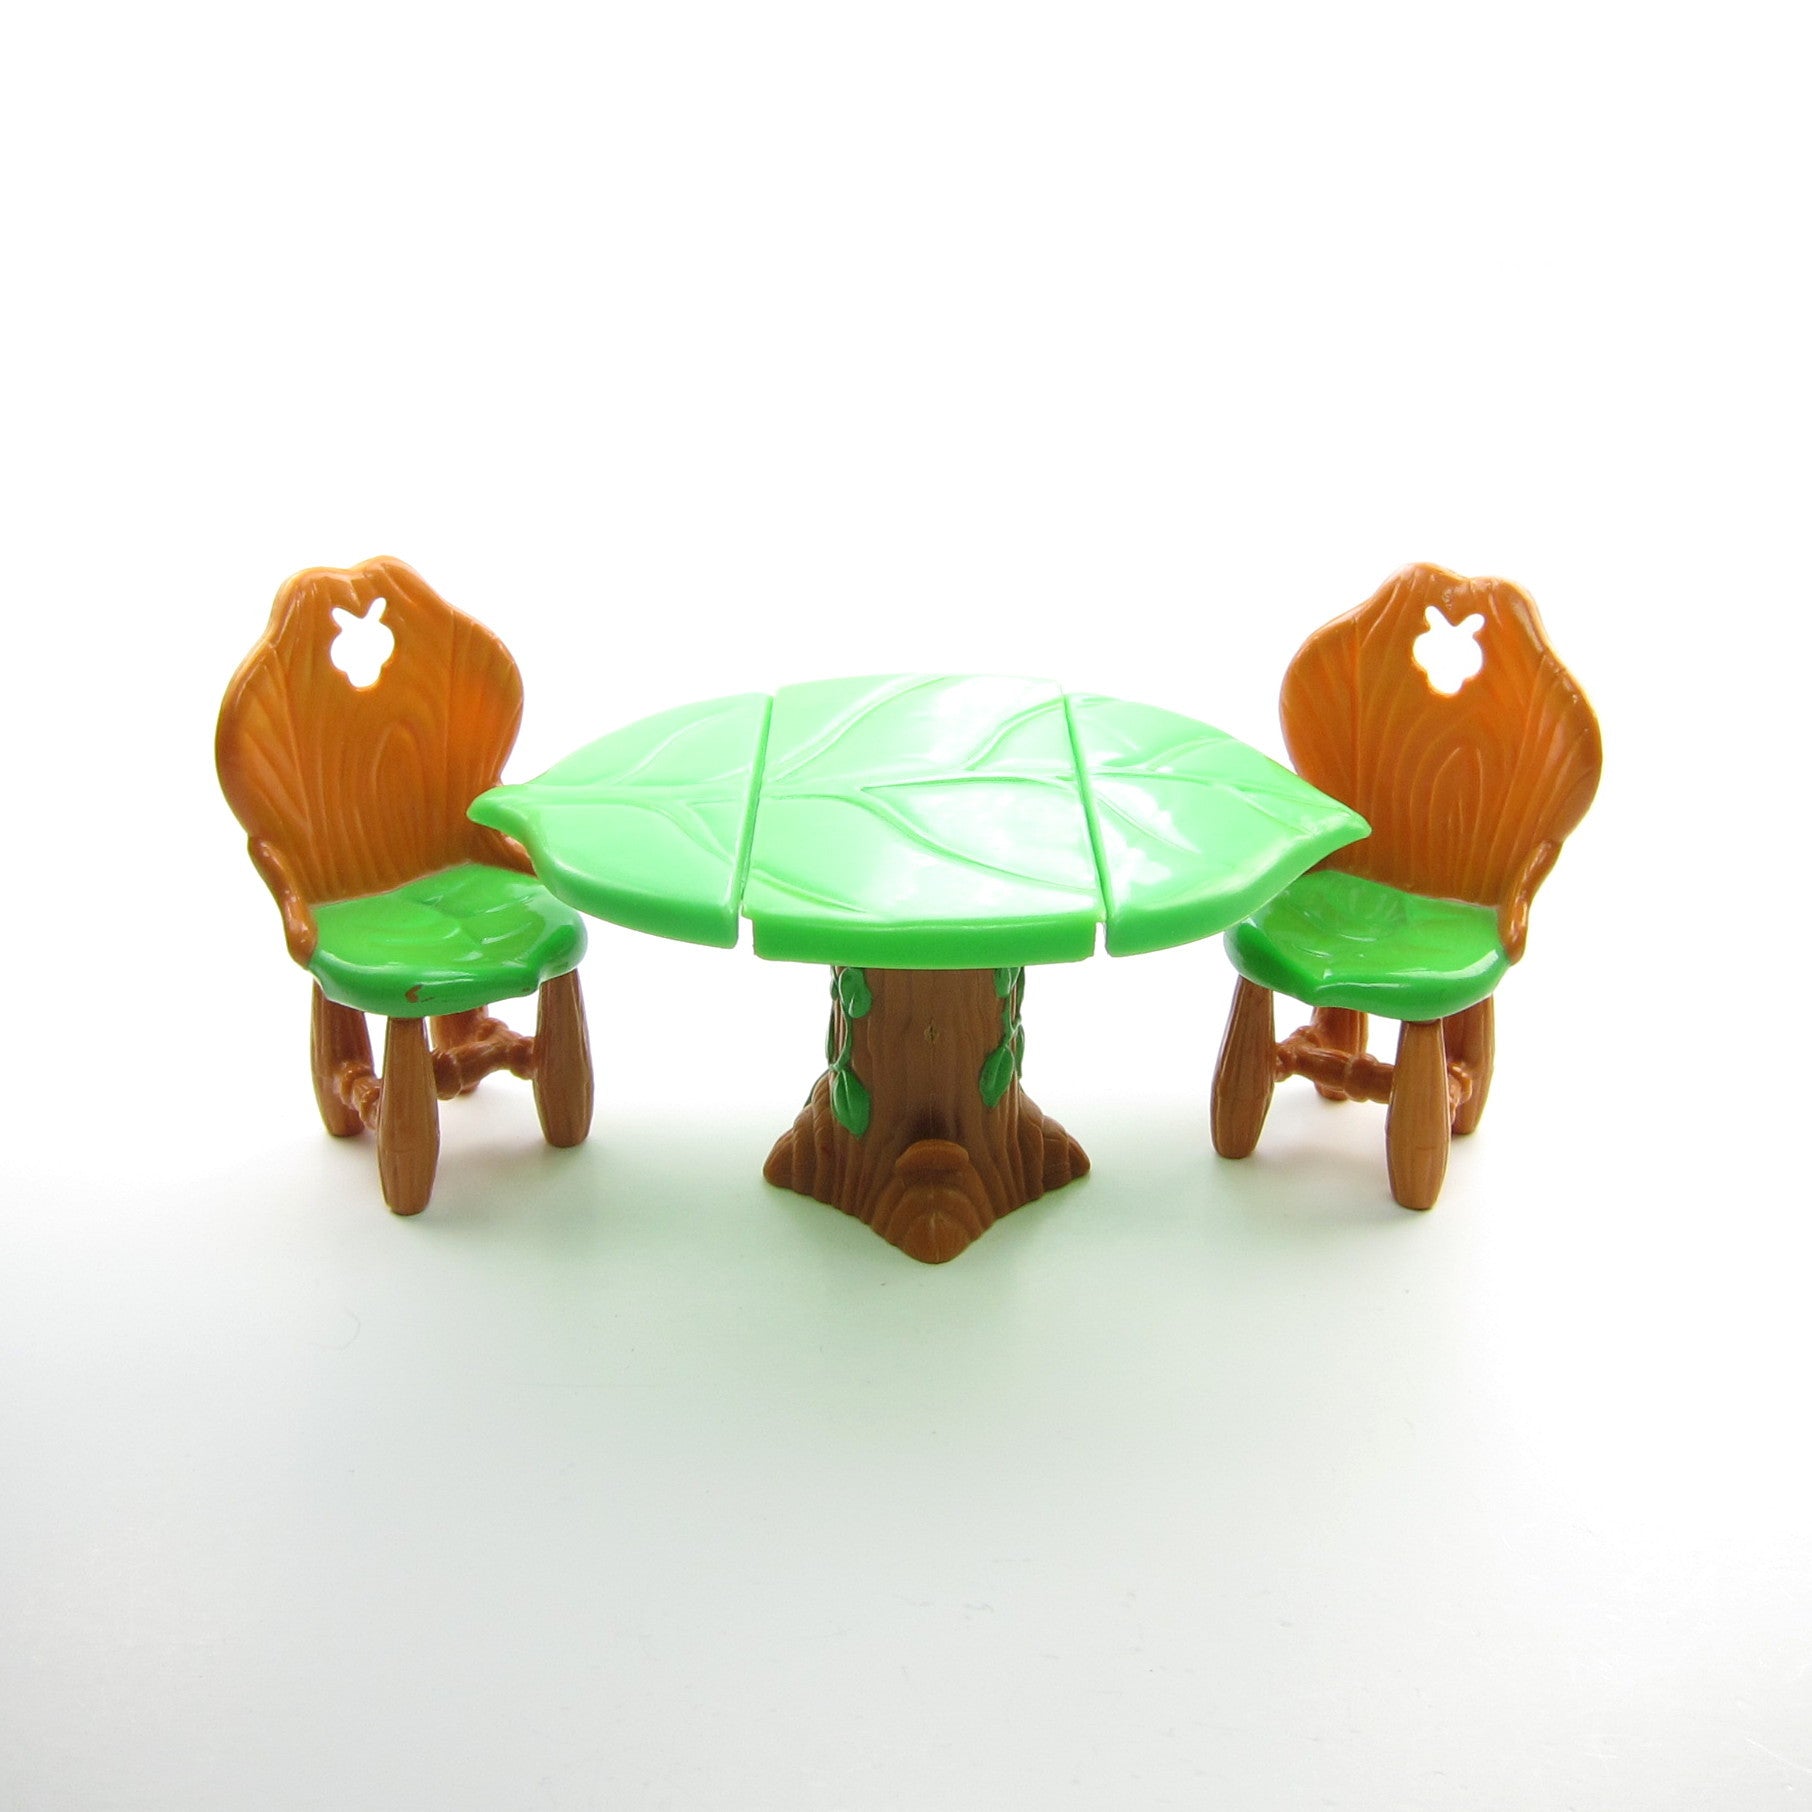 Dining Table Chairs For Strawberry Shortcake Berry Happy Home Dollho Brown Eyed Rose